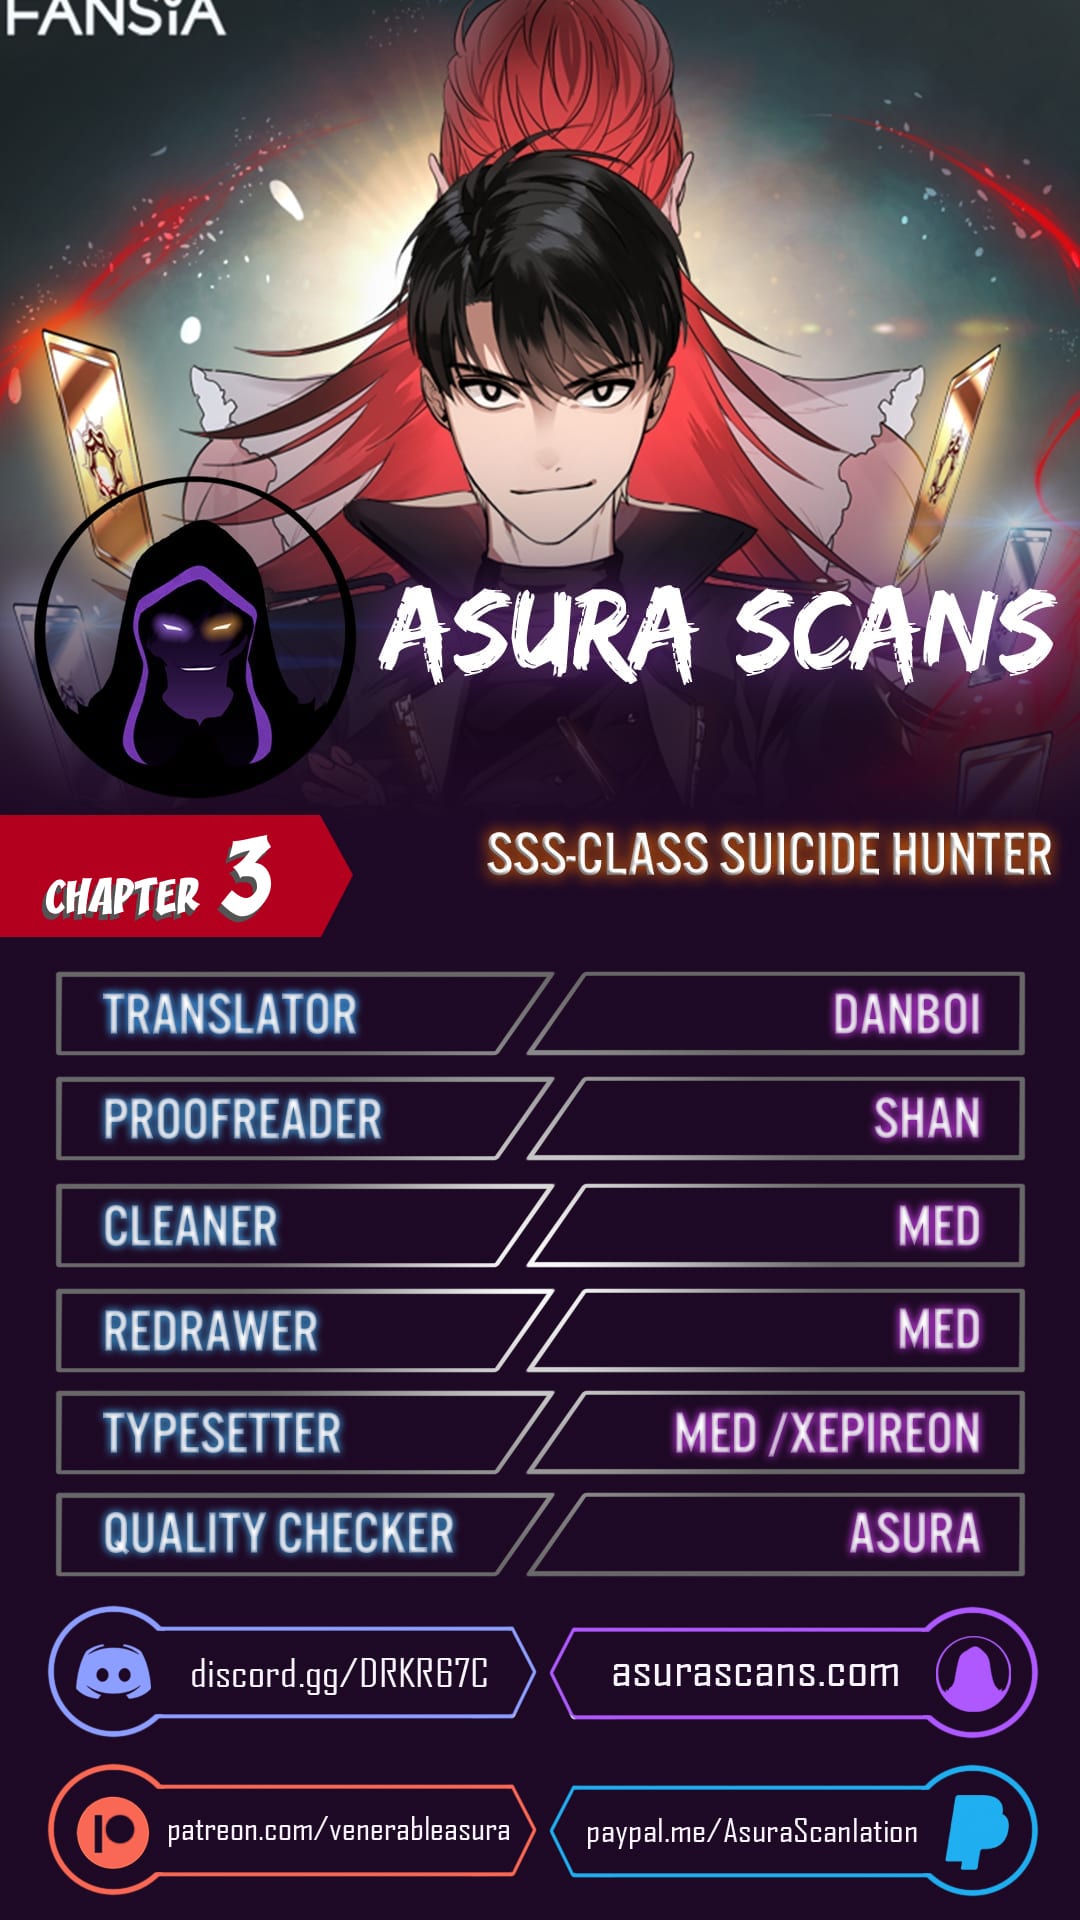 SSS-Class Suicide Hunter chapter 3